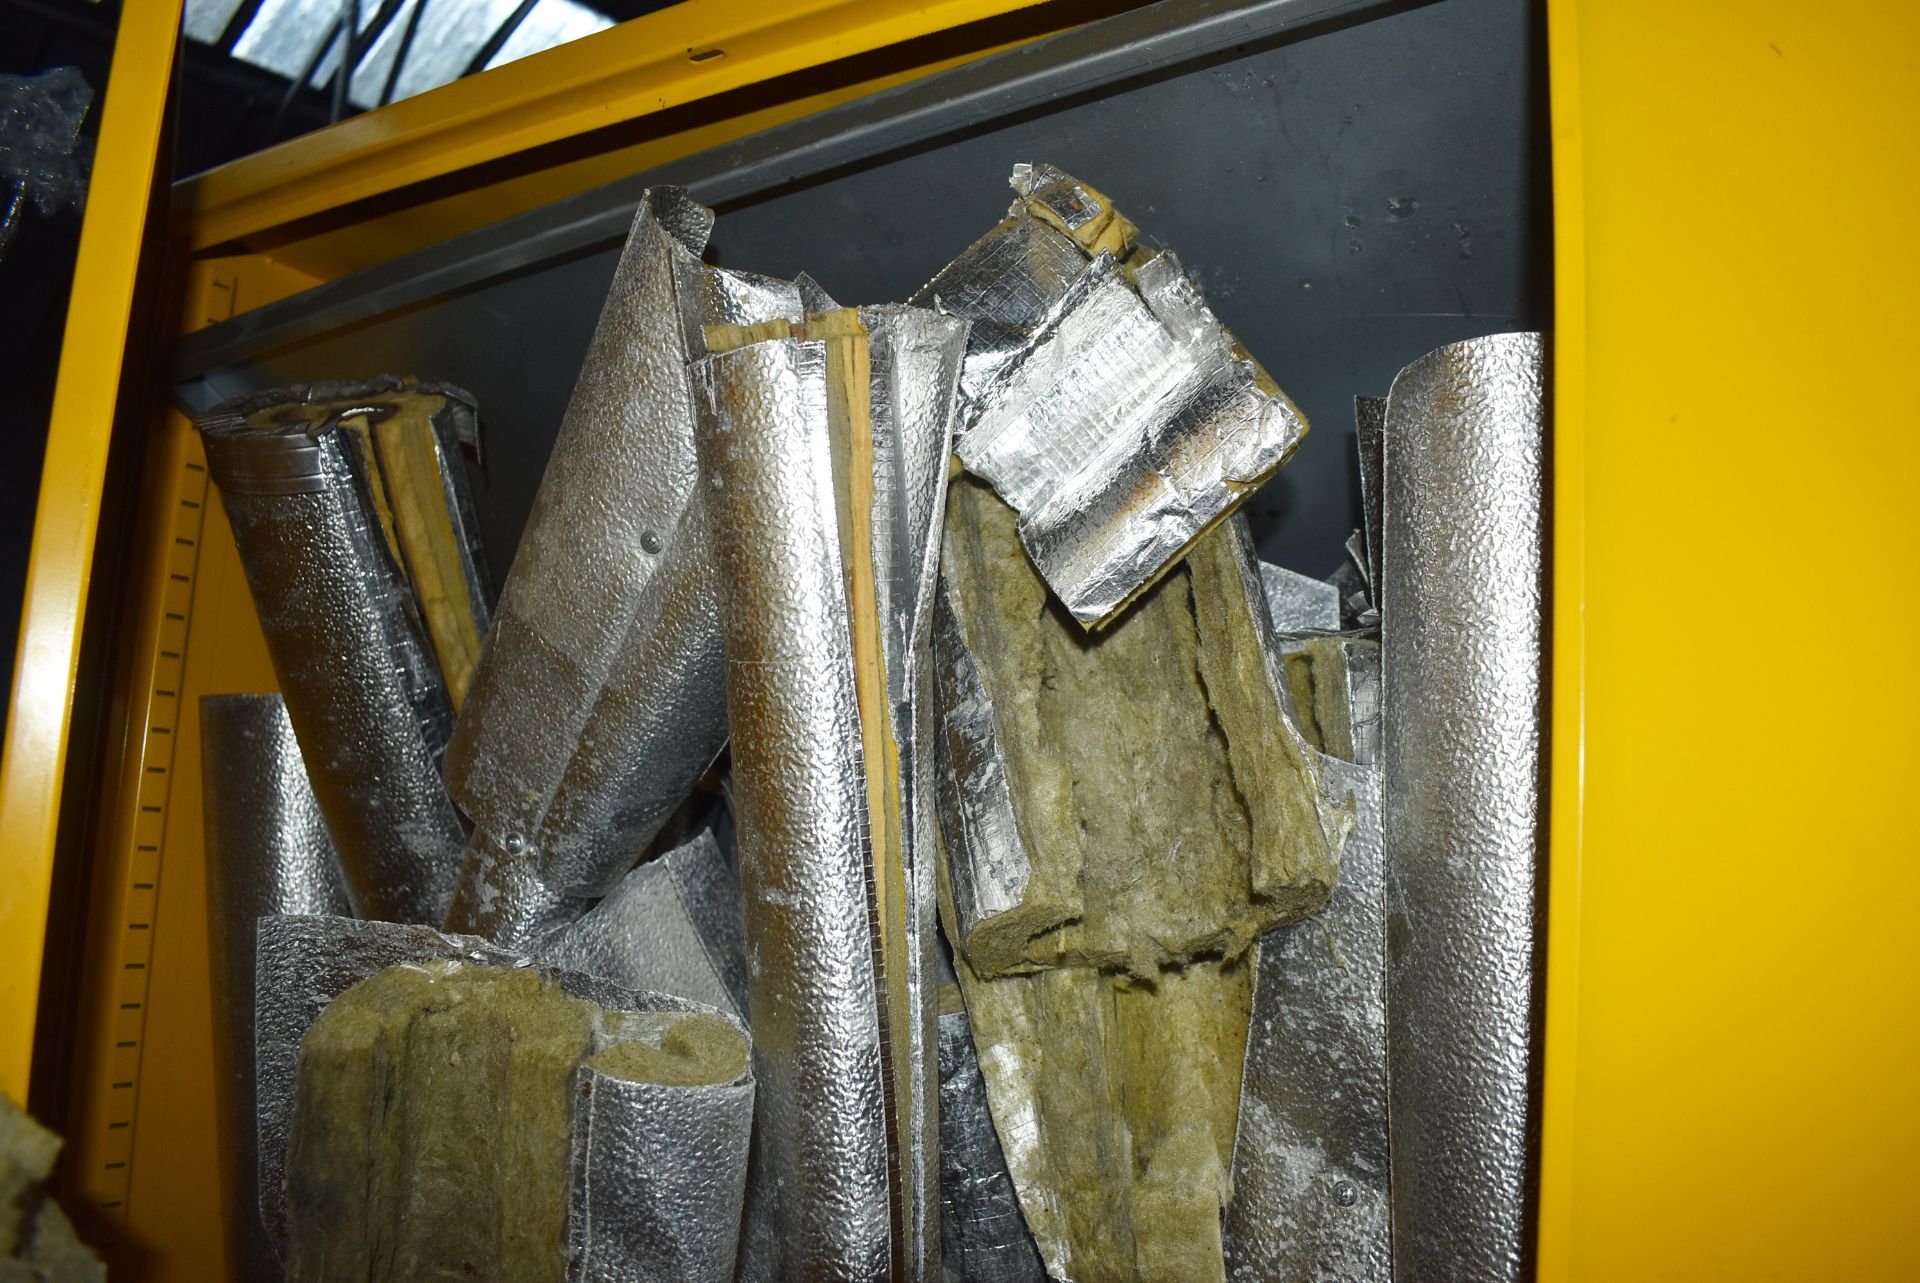 Large Quantity of Thermal Pipe Covering Contents of Two Upright Cabinets - Cabinets Not Included - - Image 3 of 10